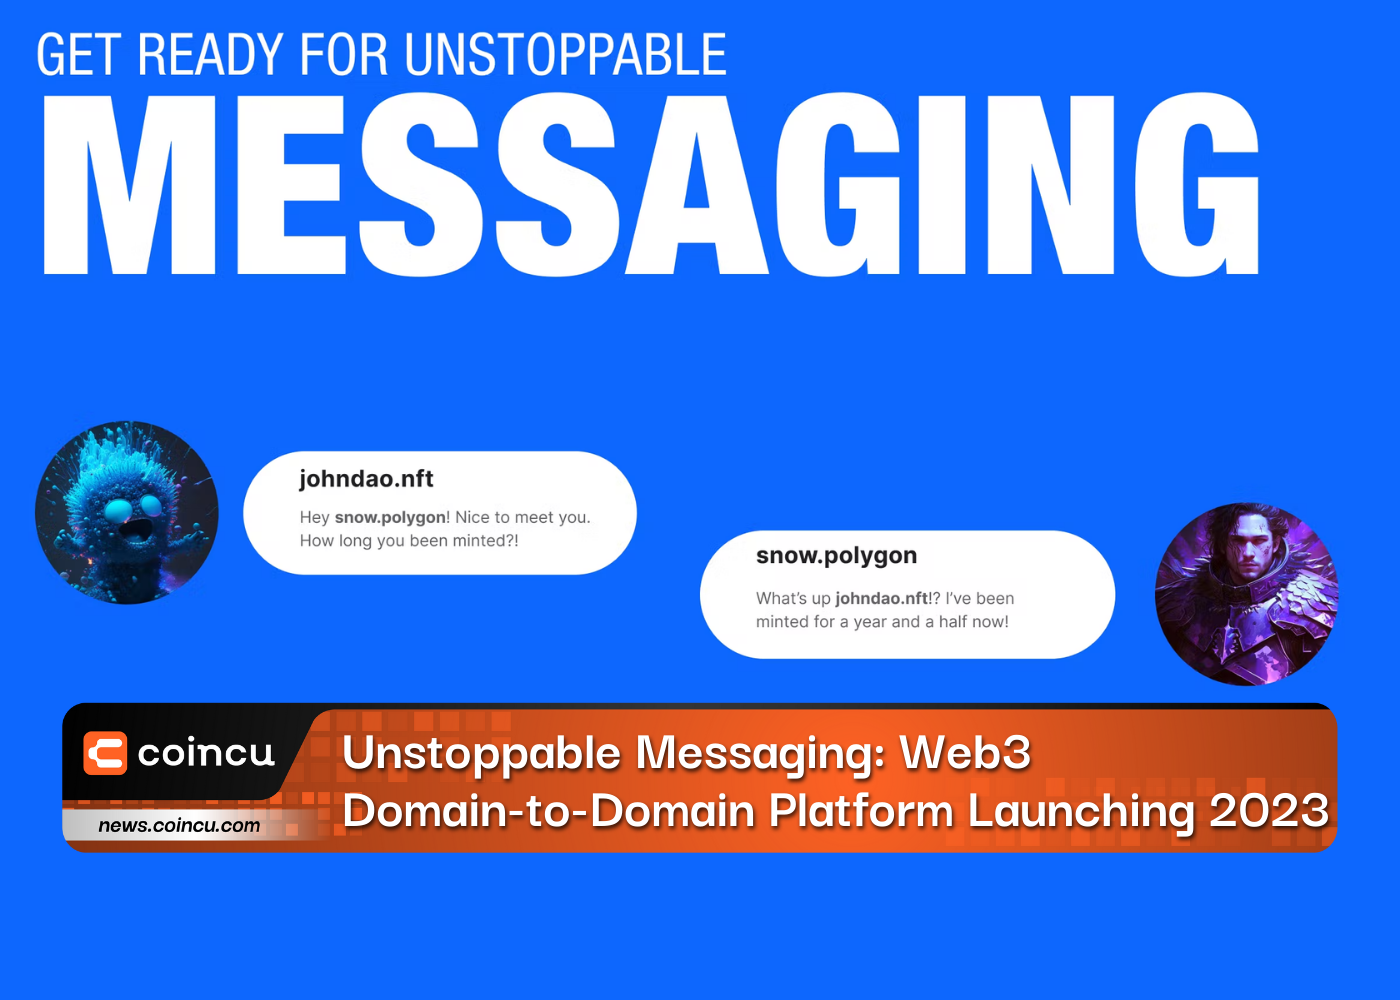 Unstoppable Messaging: Web3 Domain-to-Domain Platform Launching 2023